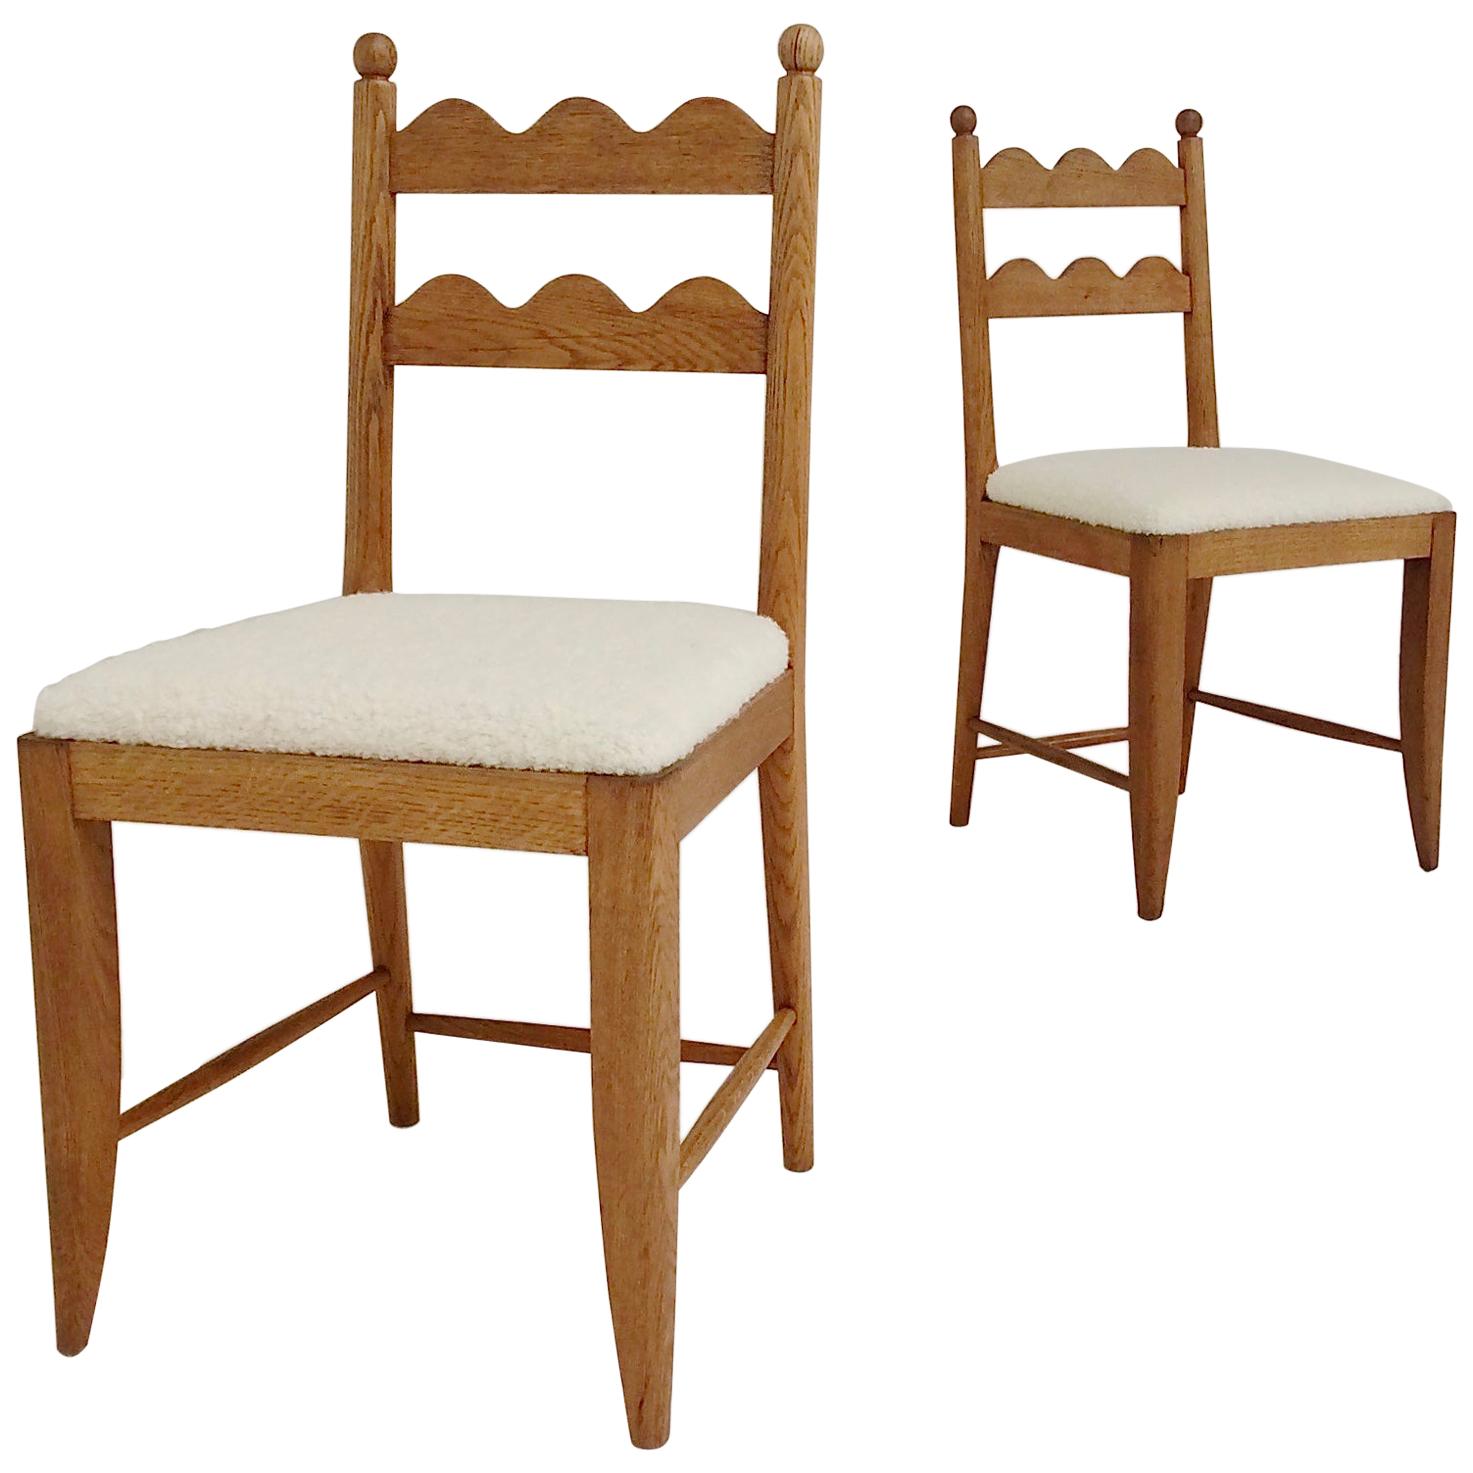 Jean Royere Attributed Pair of Oak Chairs, circa 1946, France